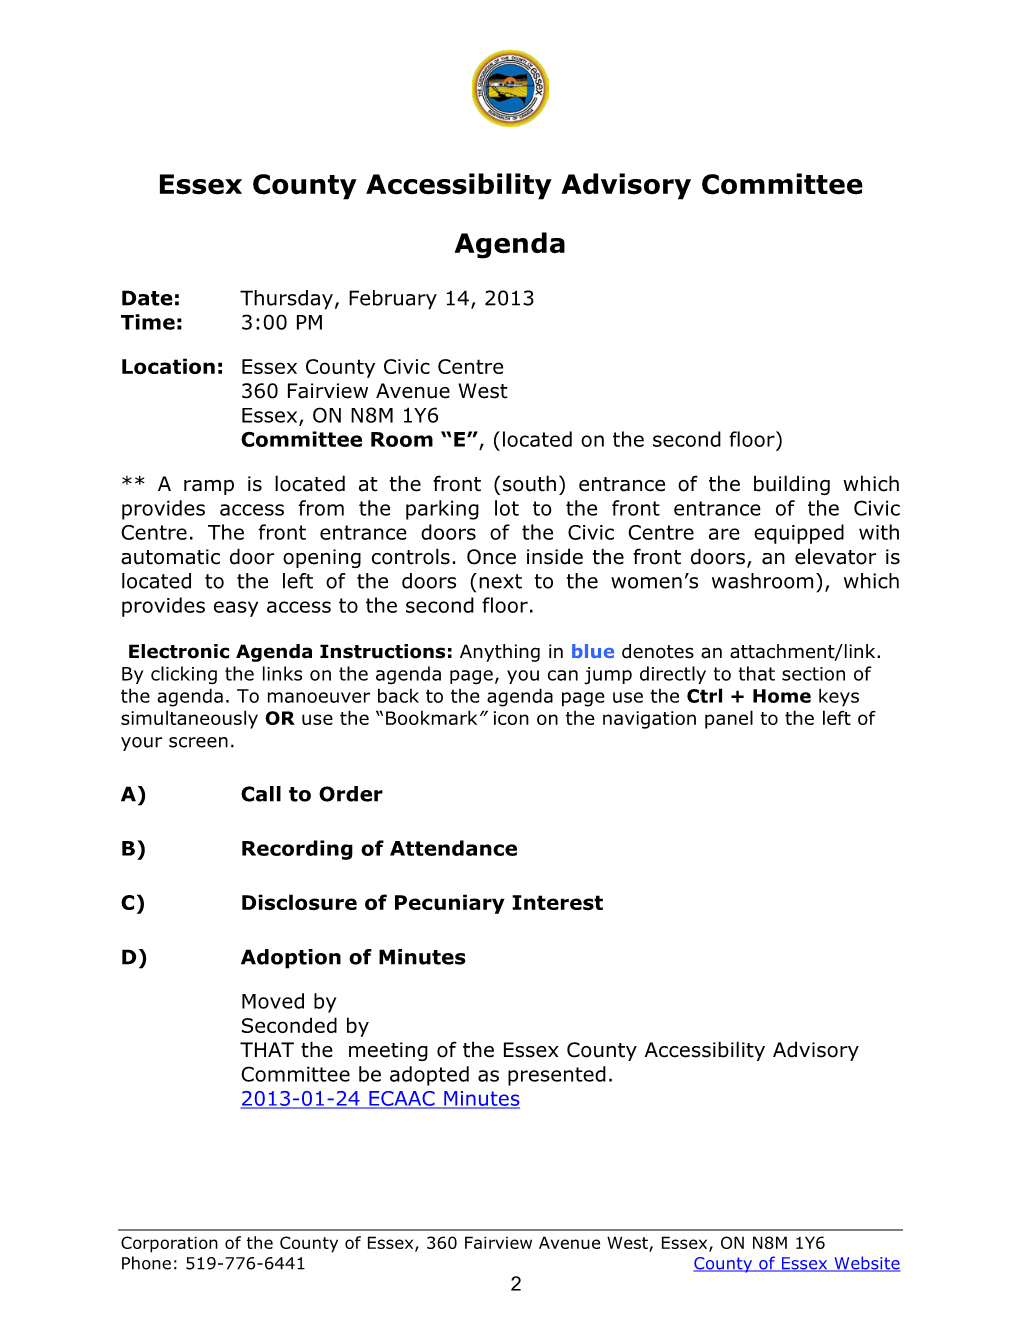 Essex County Accessibility Advisory Committee Agenda Page 2 of 4 Thursday, February 14, 2013